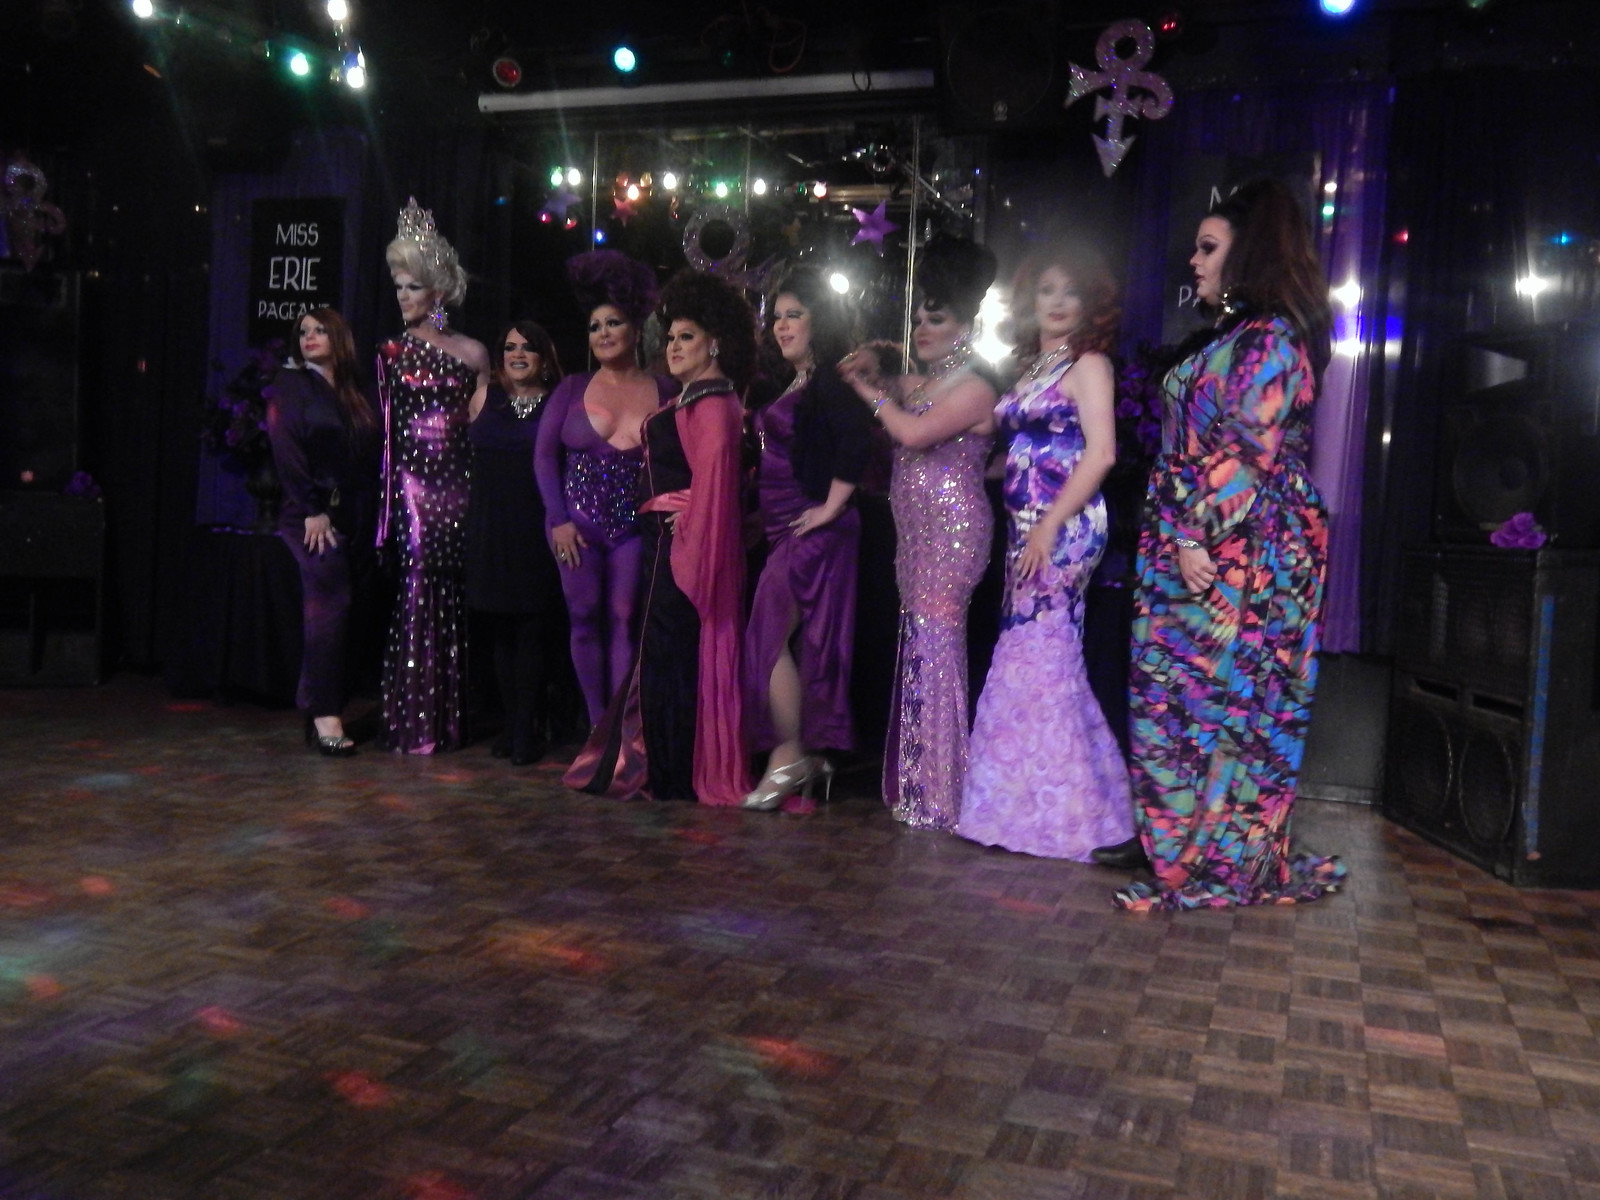 Former Miss Erie Title holders , Mistress Vanitay, Veronica Lace, Buffy  Lynn Hayes, Danyel Vasquez; Michelle Michaels, Misty Michaels Kall, Valerie Valentino, Angelica Redd and Rhiannon Angelina